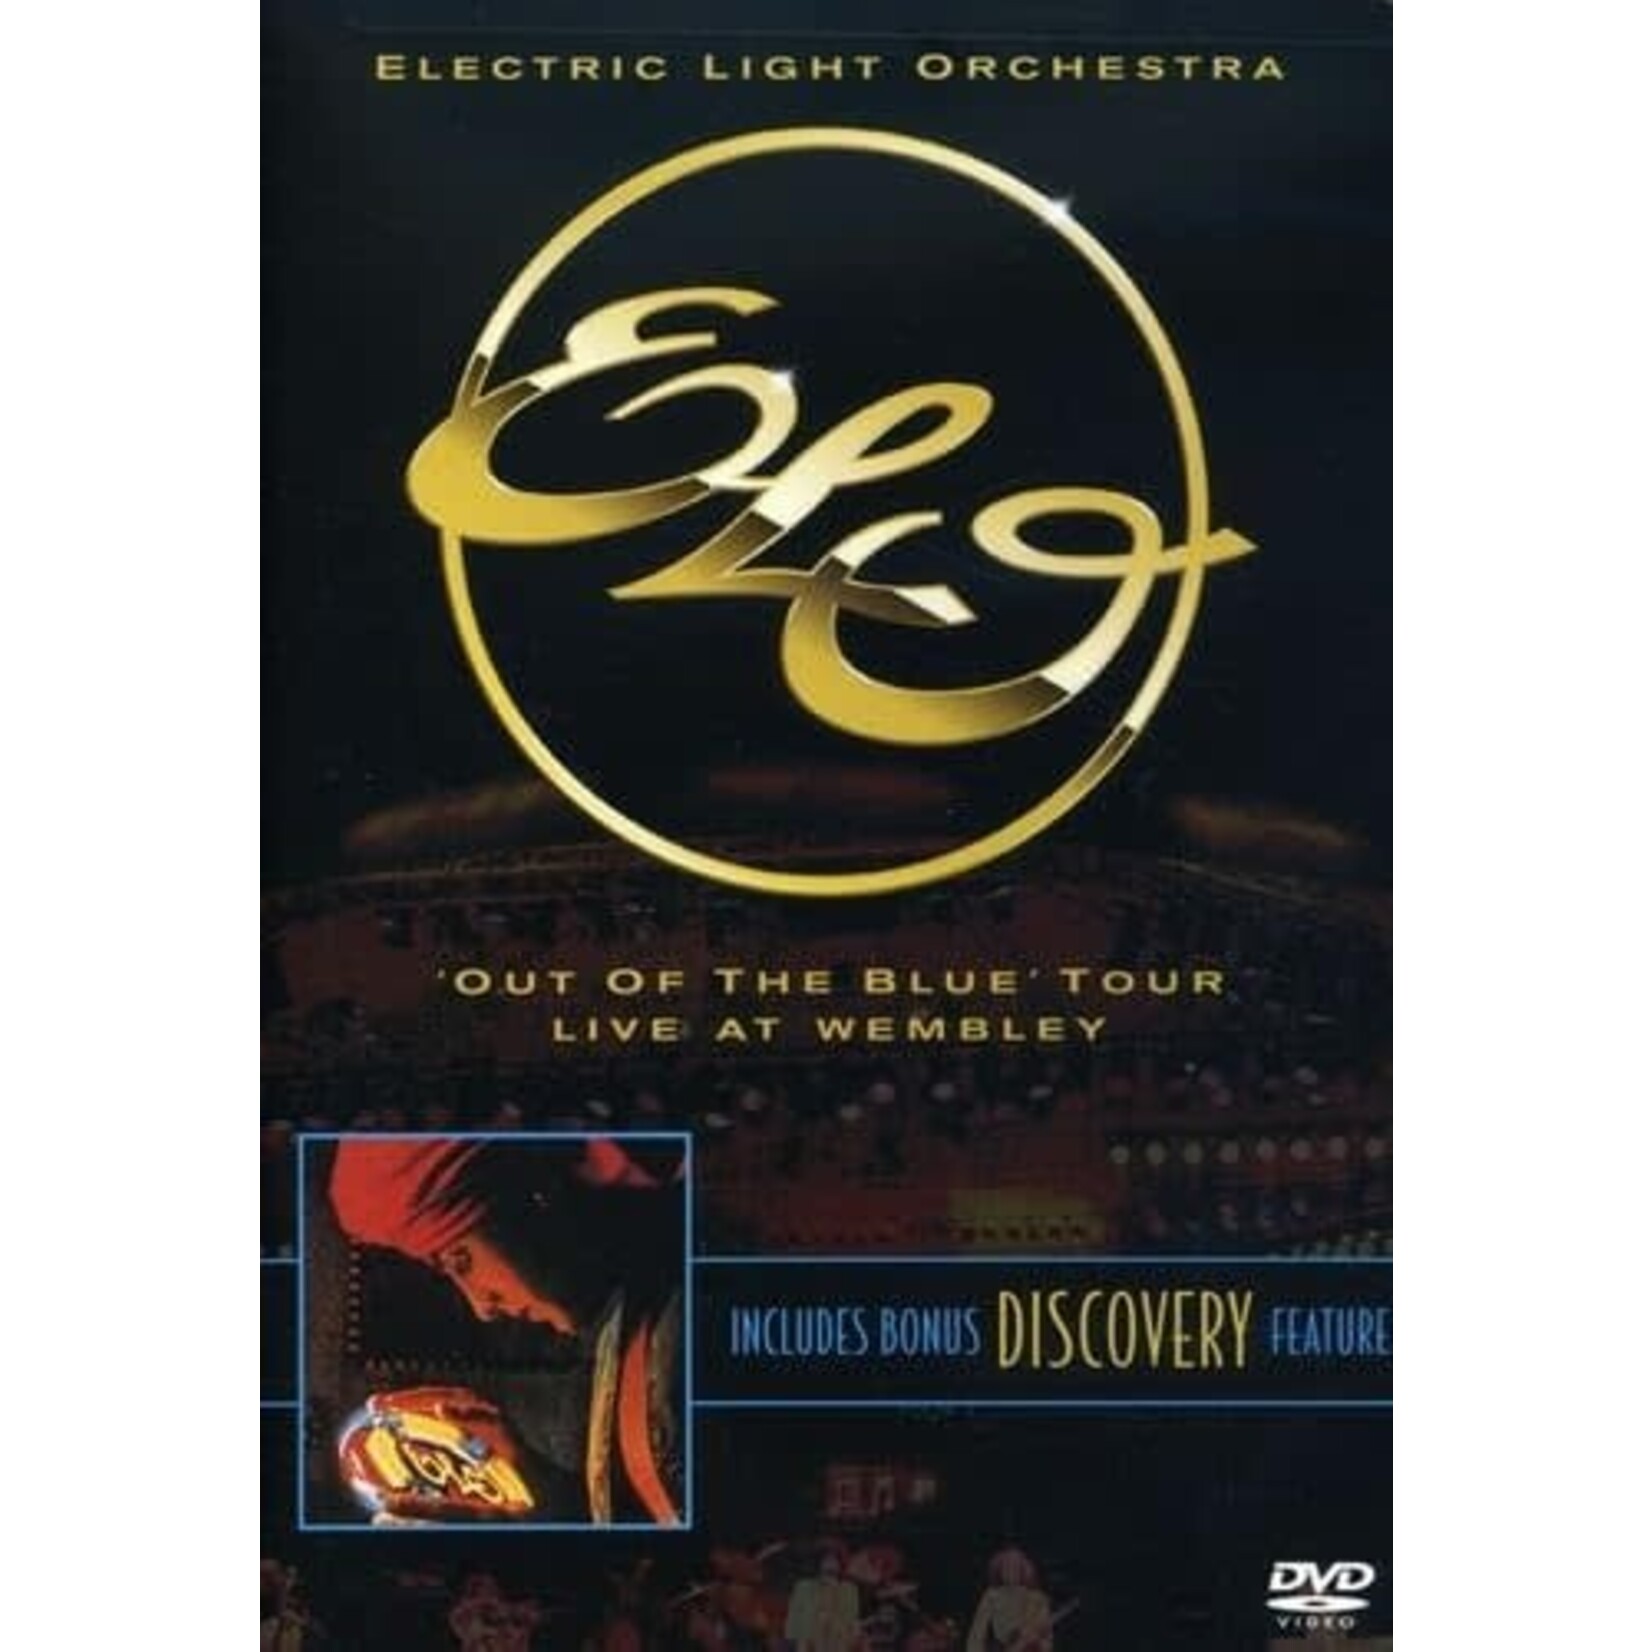 Electric Light Orchestra - Out Of The Blue Tour: Live At Wembley/Discovery [USED DVD]